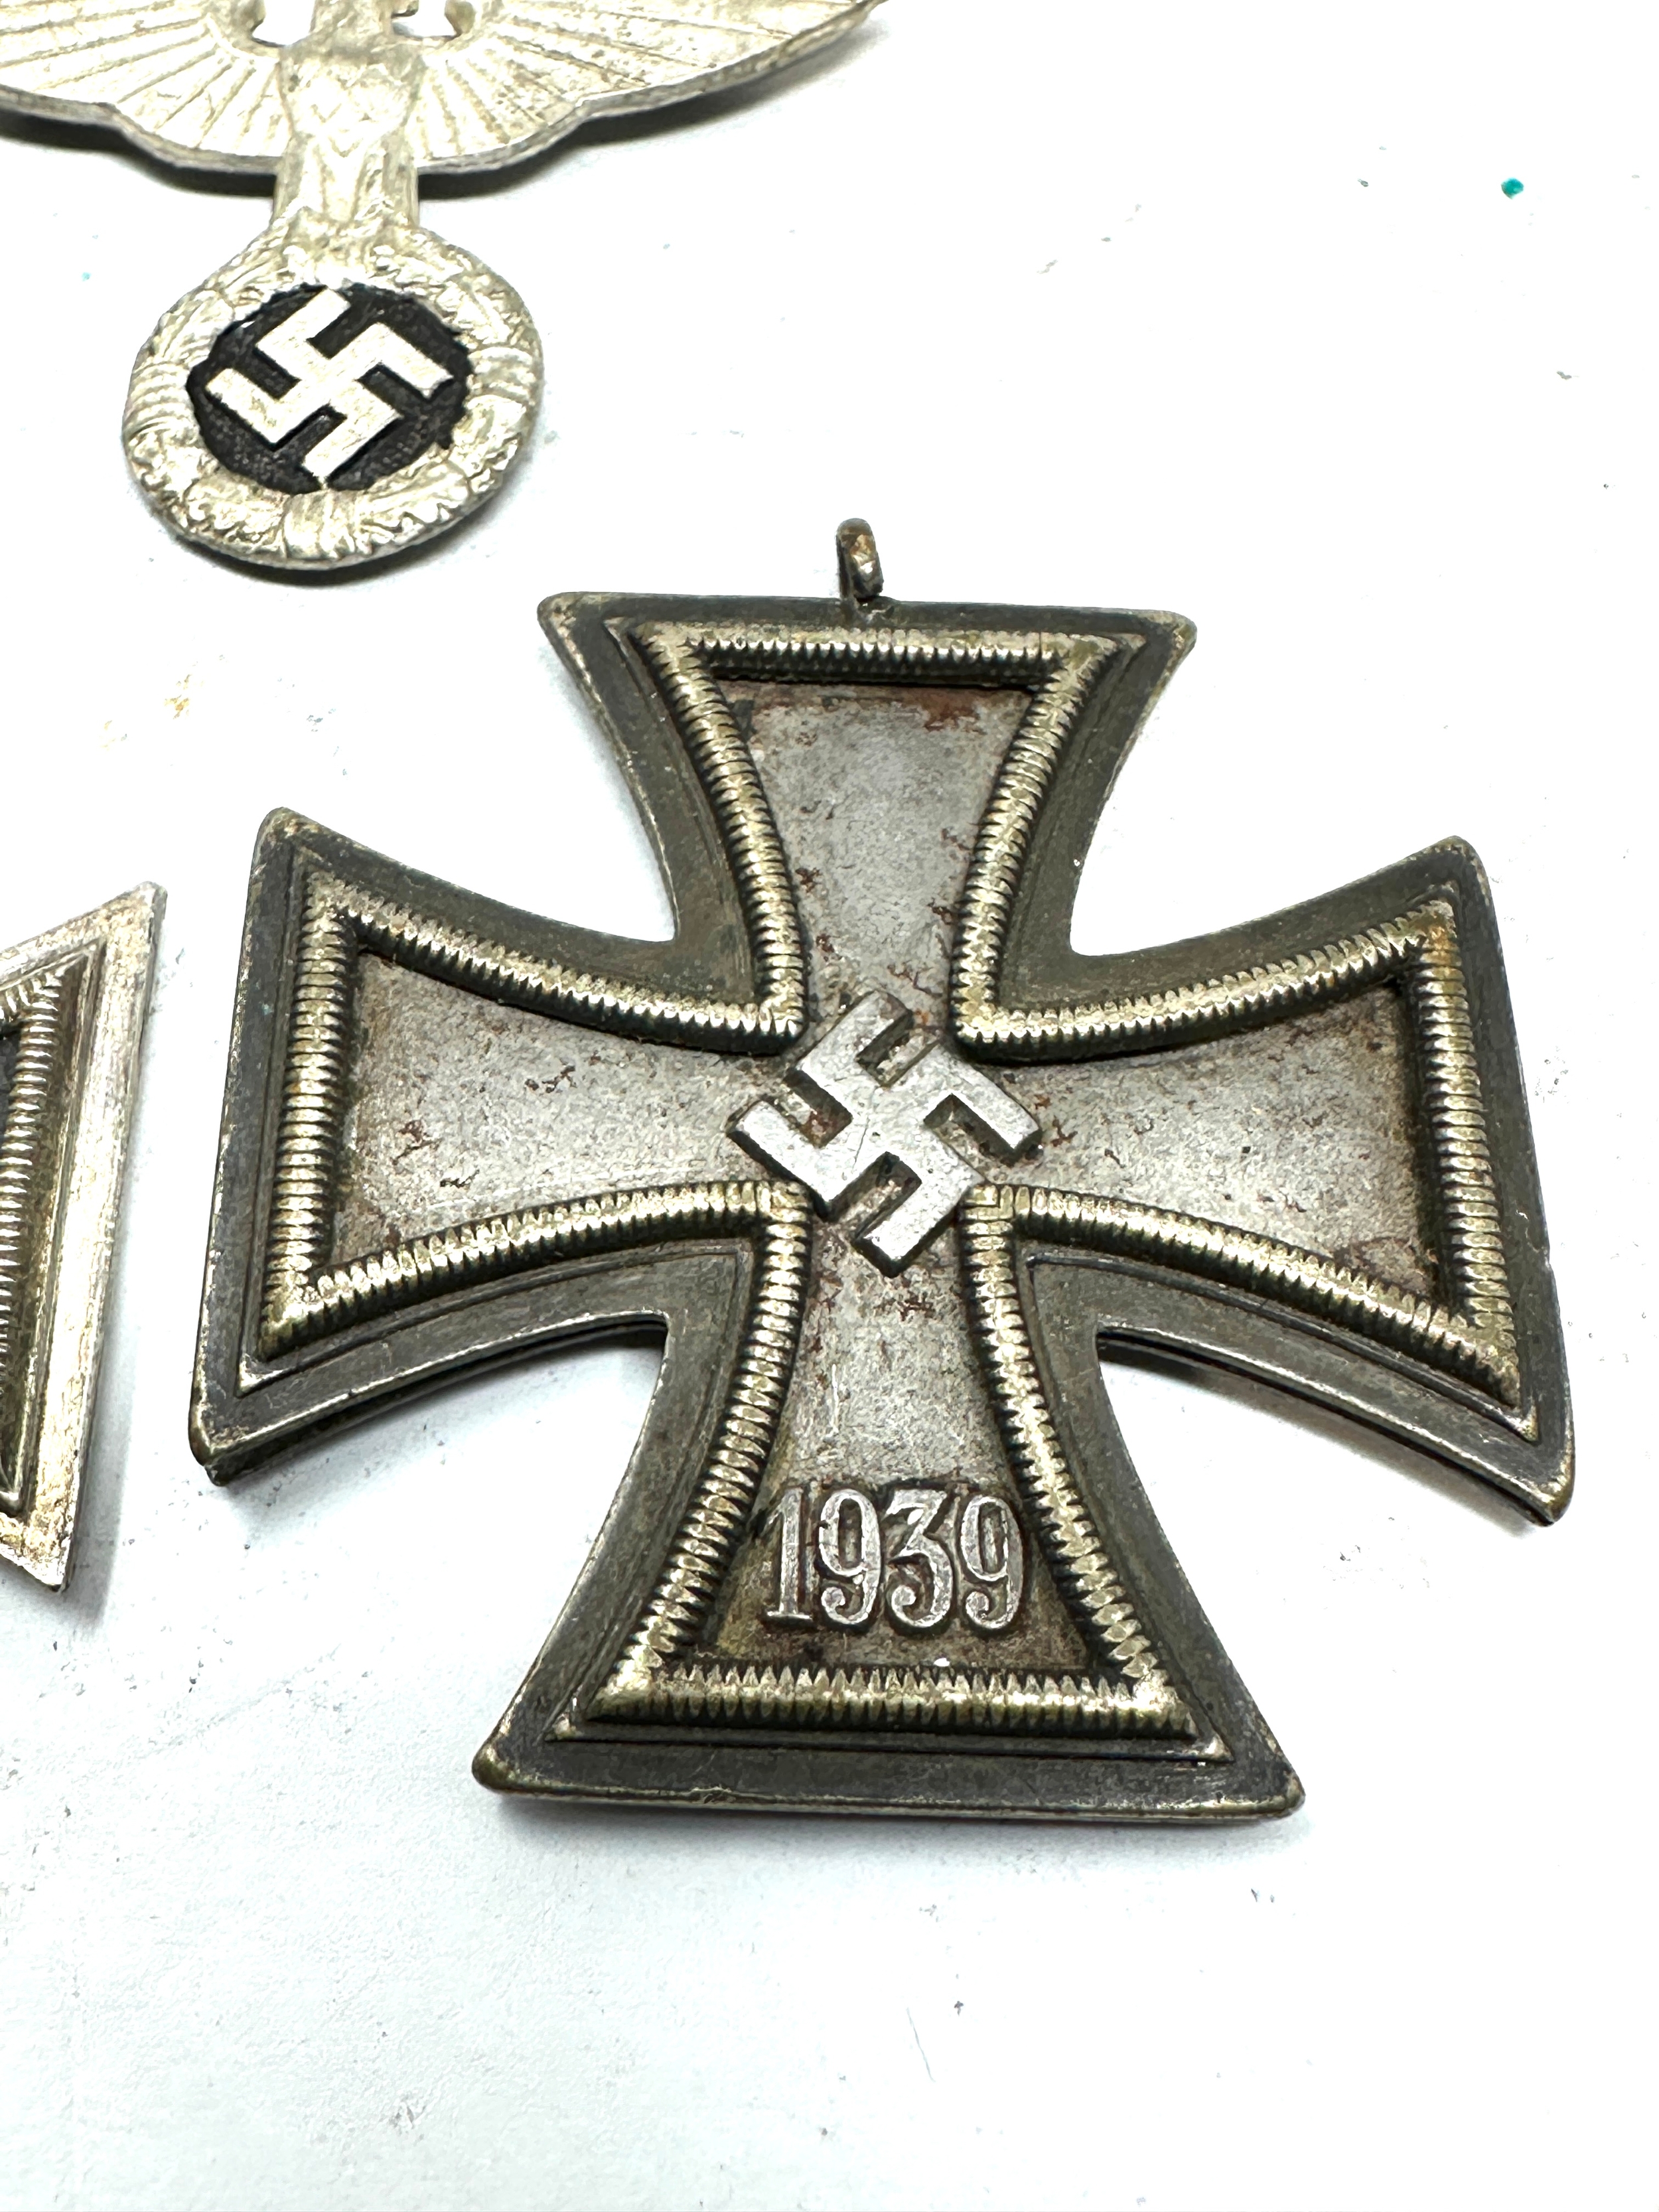 2 ww2 german iron crosses and cap eagle - Image 3 of 5